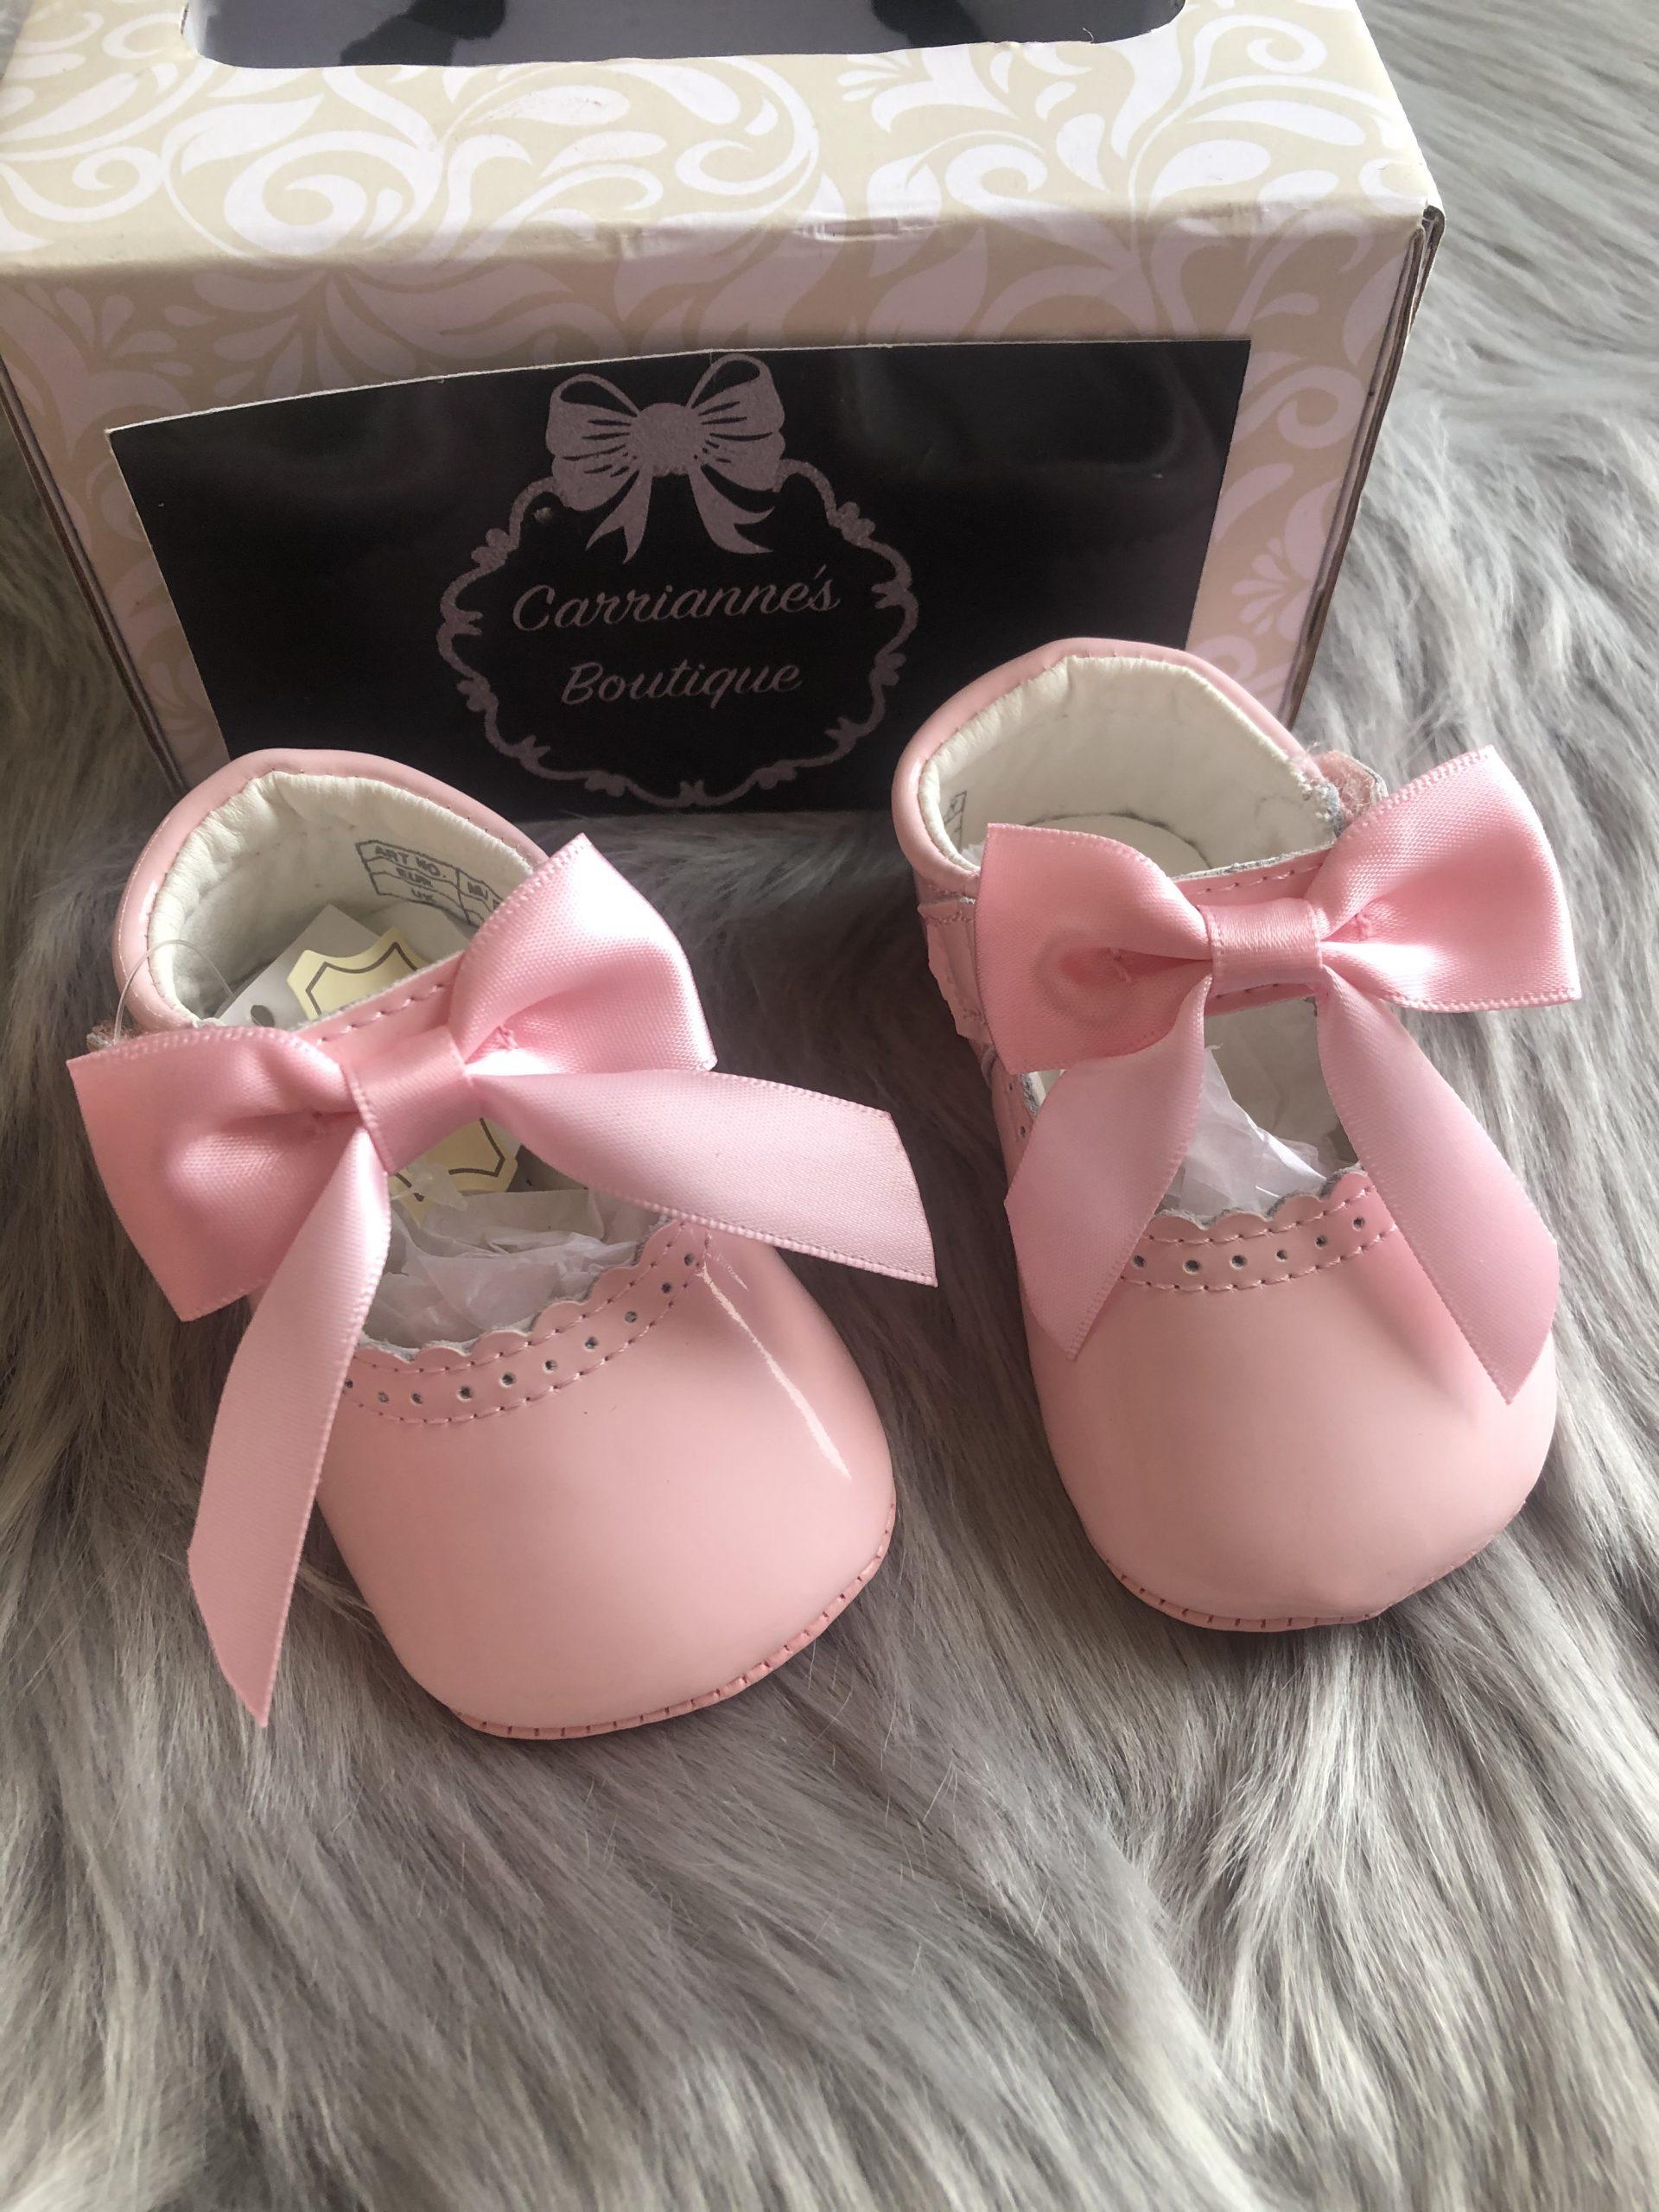 Patent pink pram shoes - Carrianne's 